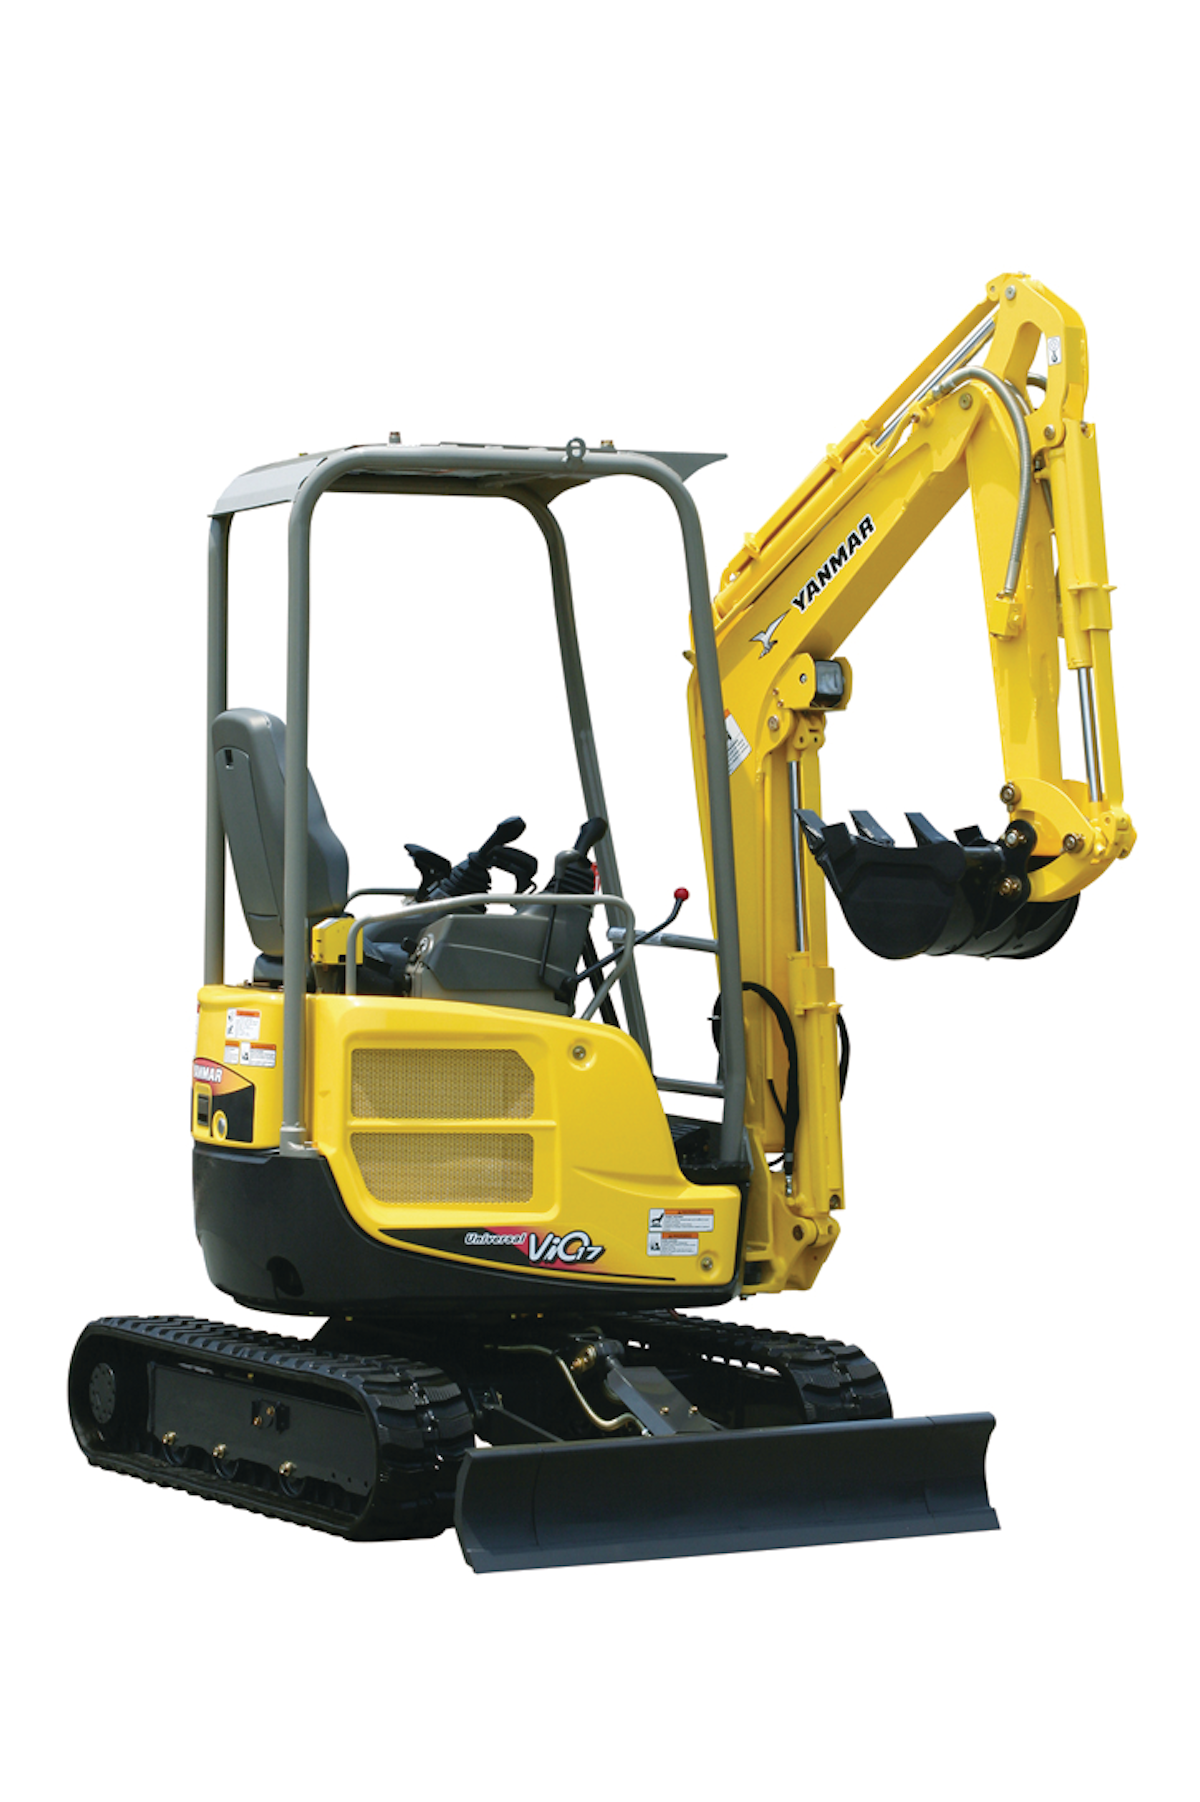 Vi017 From: Yanmar America Corp. | For Construction Pros